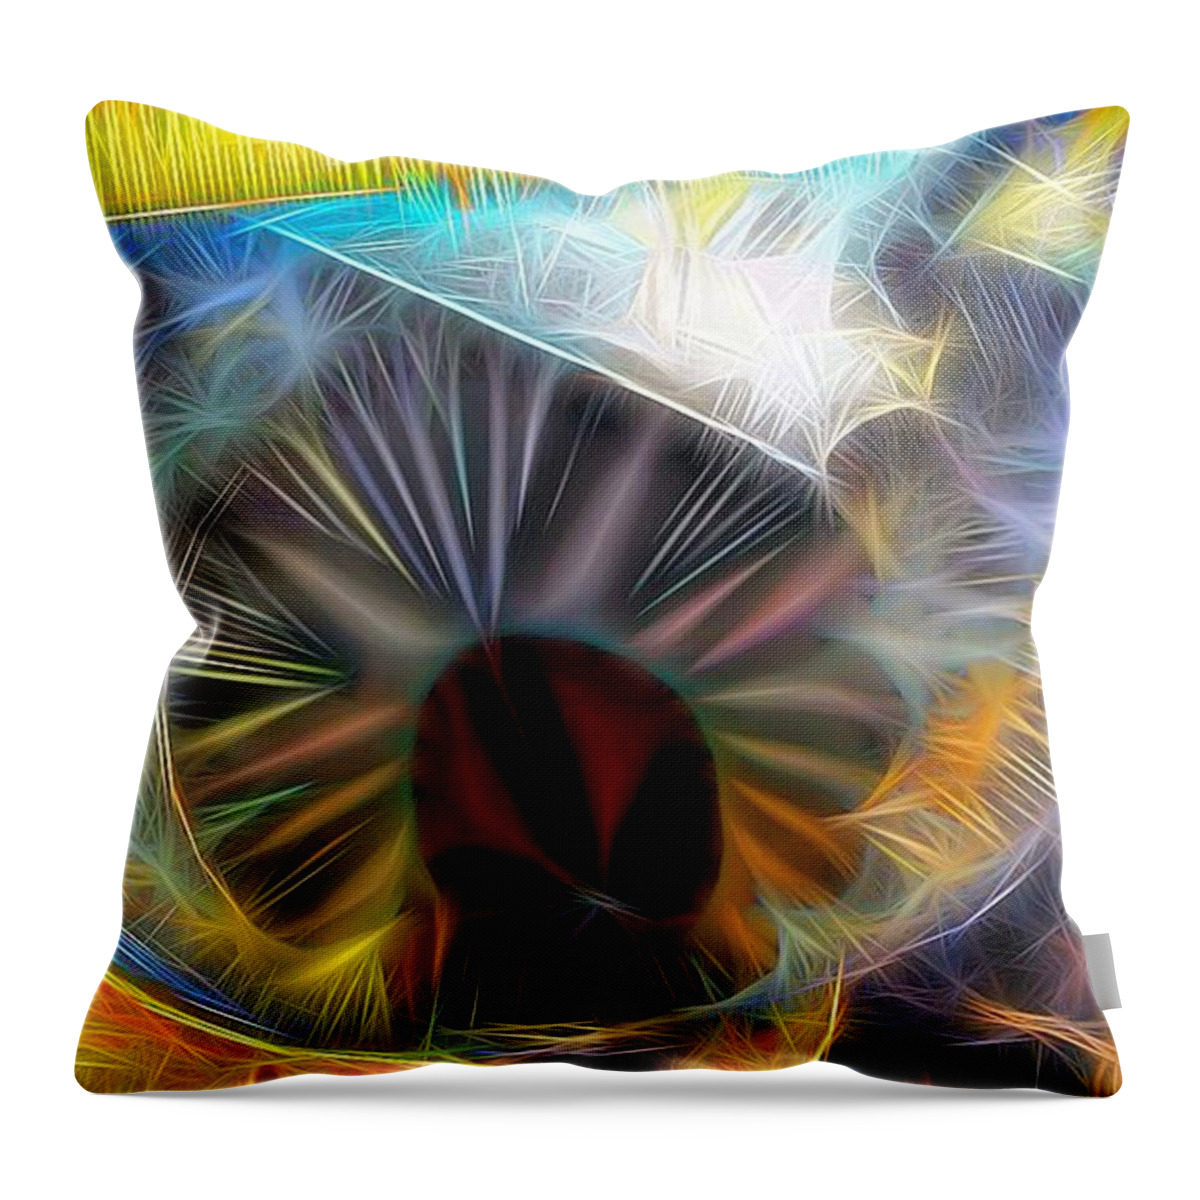 Abstract Throw Pillow featuring the digital art Shallow Well by Ronald Bissett